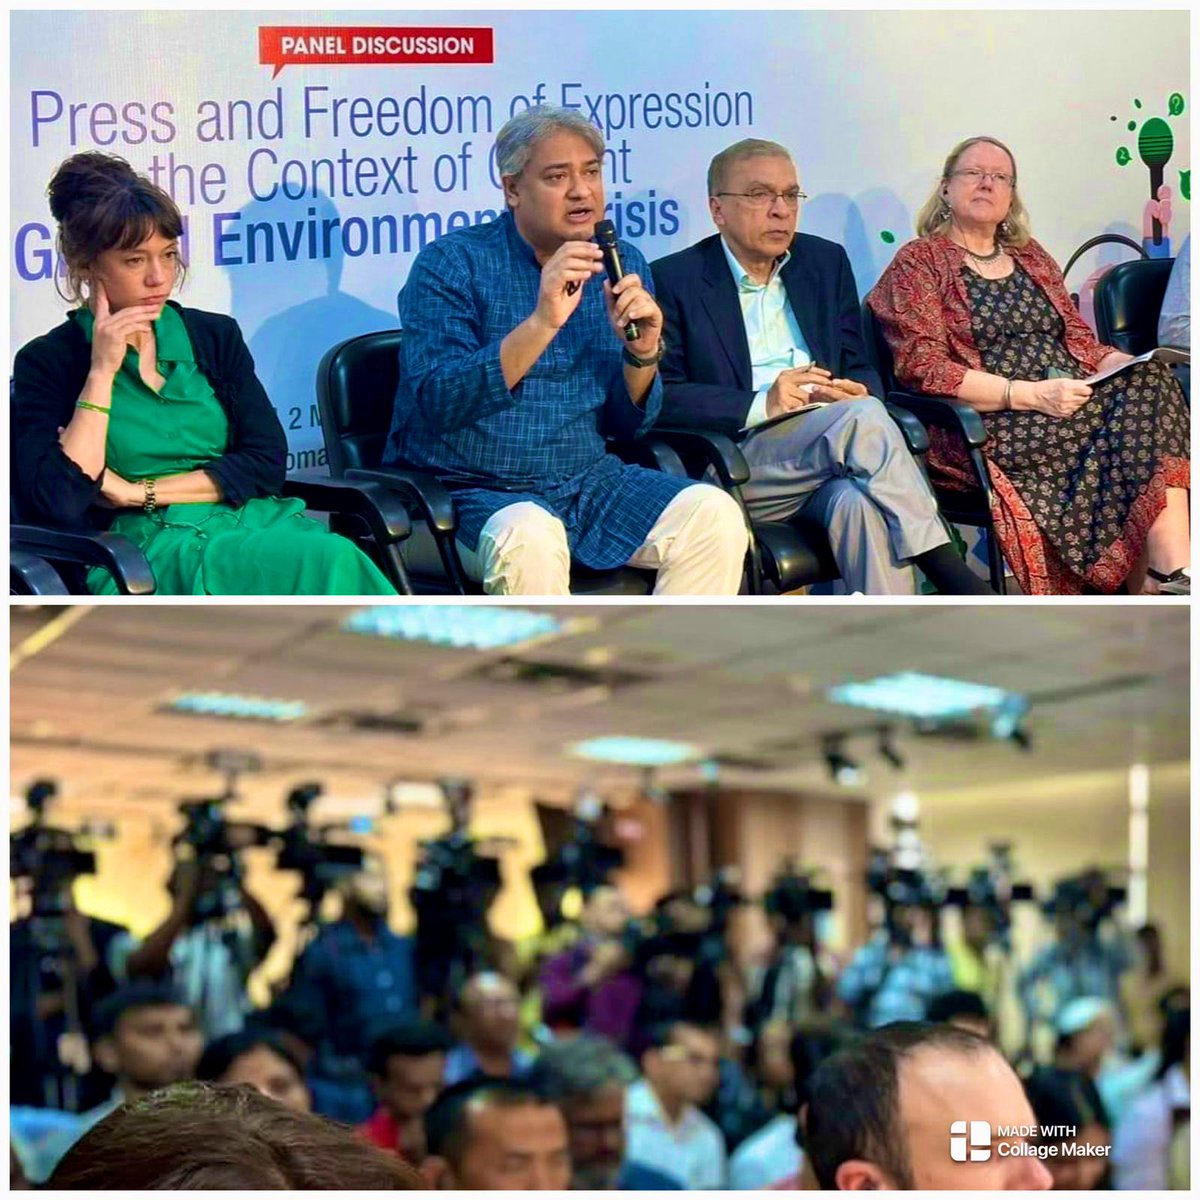 Dynamic panel on #Democracy, #PressFreedom, #FreedomOfExpression & the #ClimateCrisis, with State Minister of Information & Broadcasting @MAarafat71, UN, civil society & a lot! of journalists. 🙏 to @tib1971bd, @article19_SAS, @unescodhaka for arranging! Happy #WPFD2024!